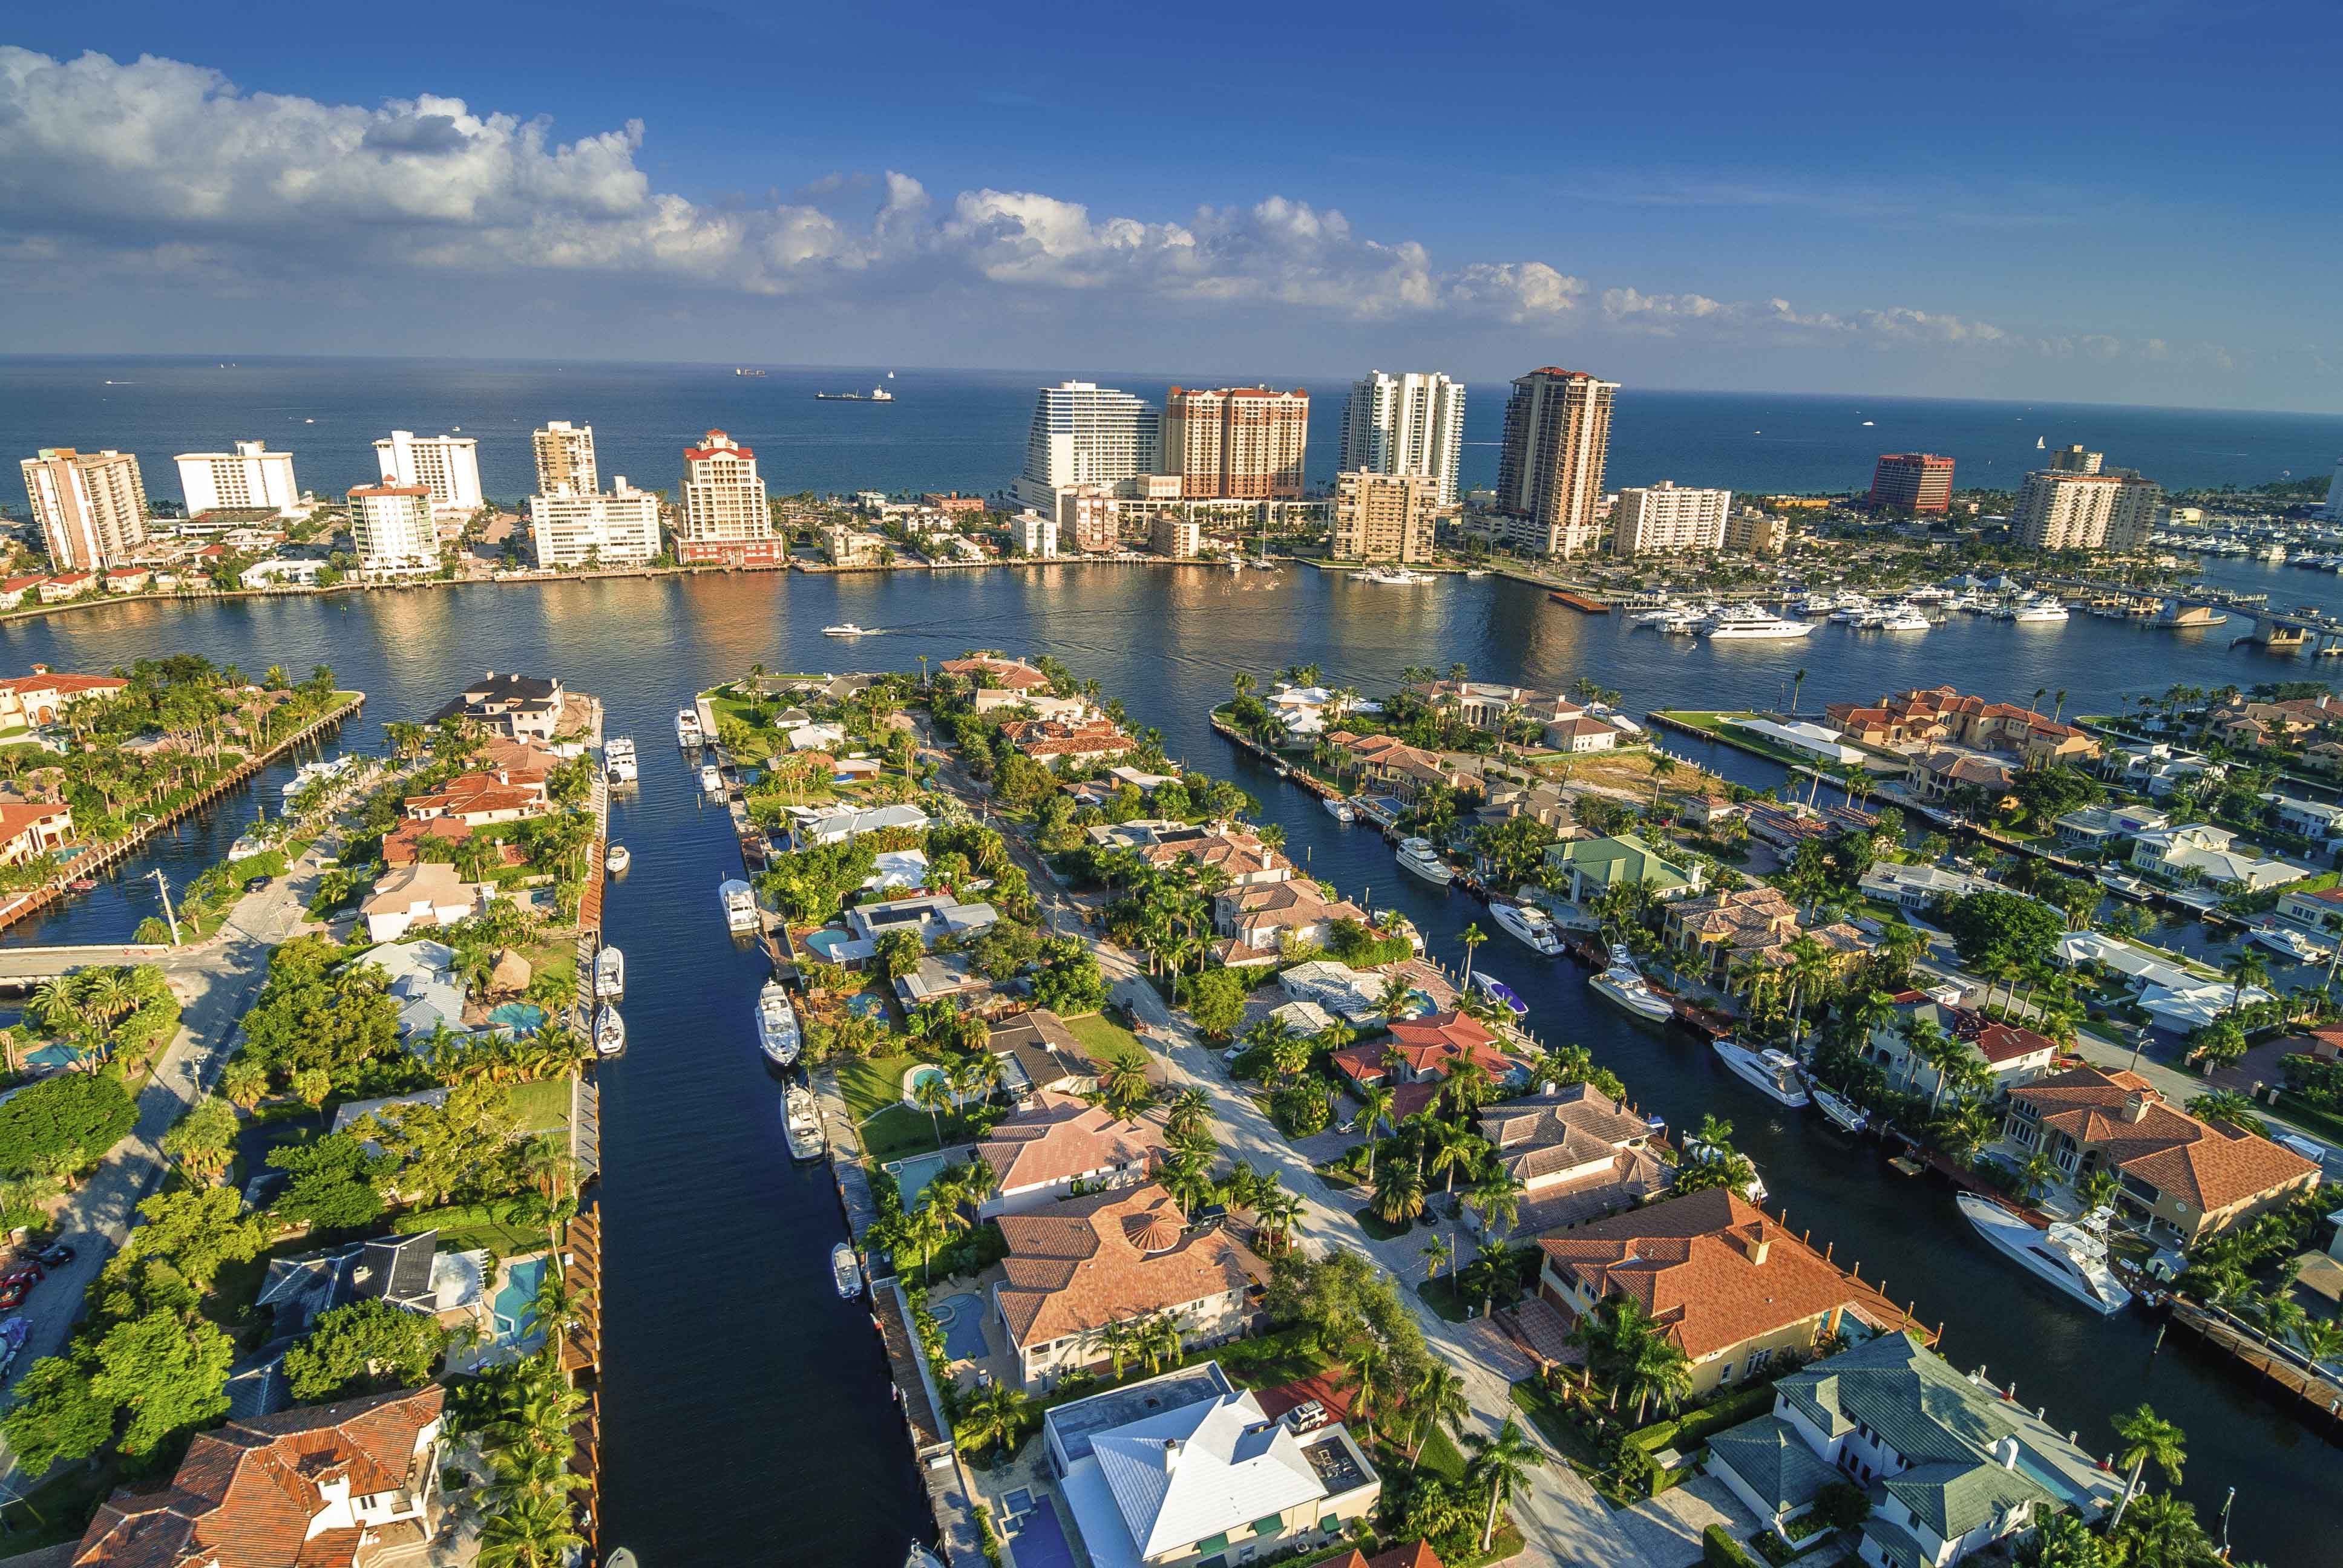 Fort Lauderdale, the 'Venice of the Americas'